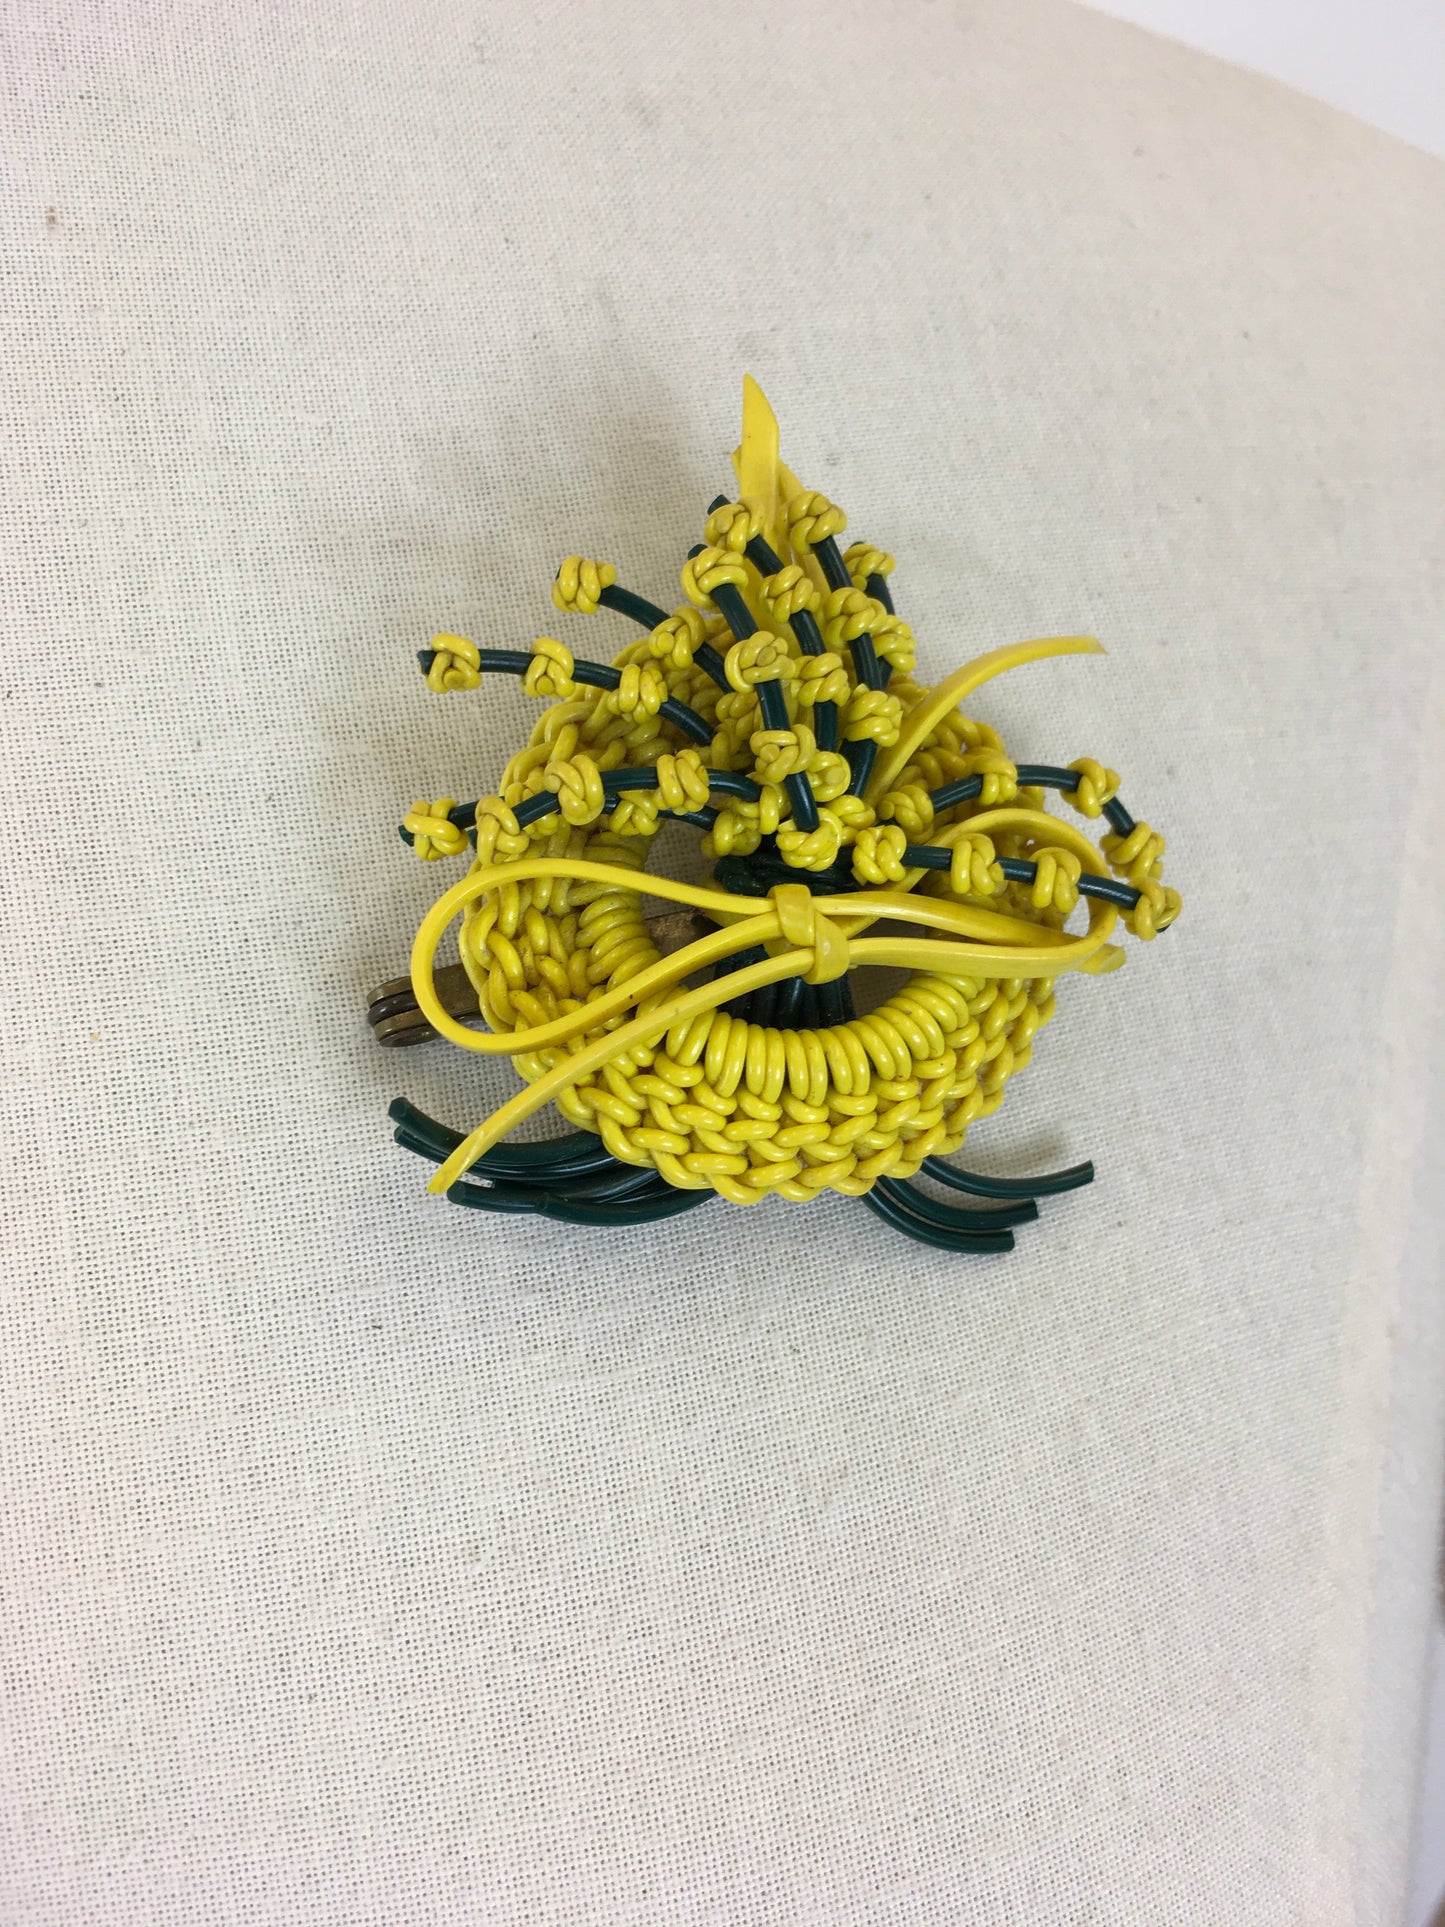 Original 1940's Large Wartime Make Do and Mend Telephone Wire Brooch - In Bottle Green & Sunflower Yellow